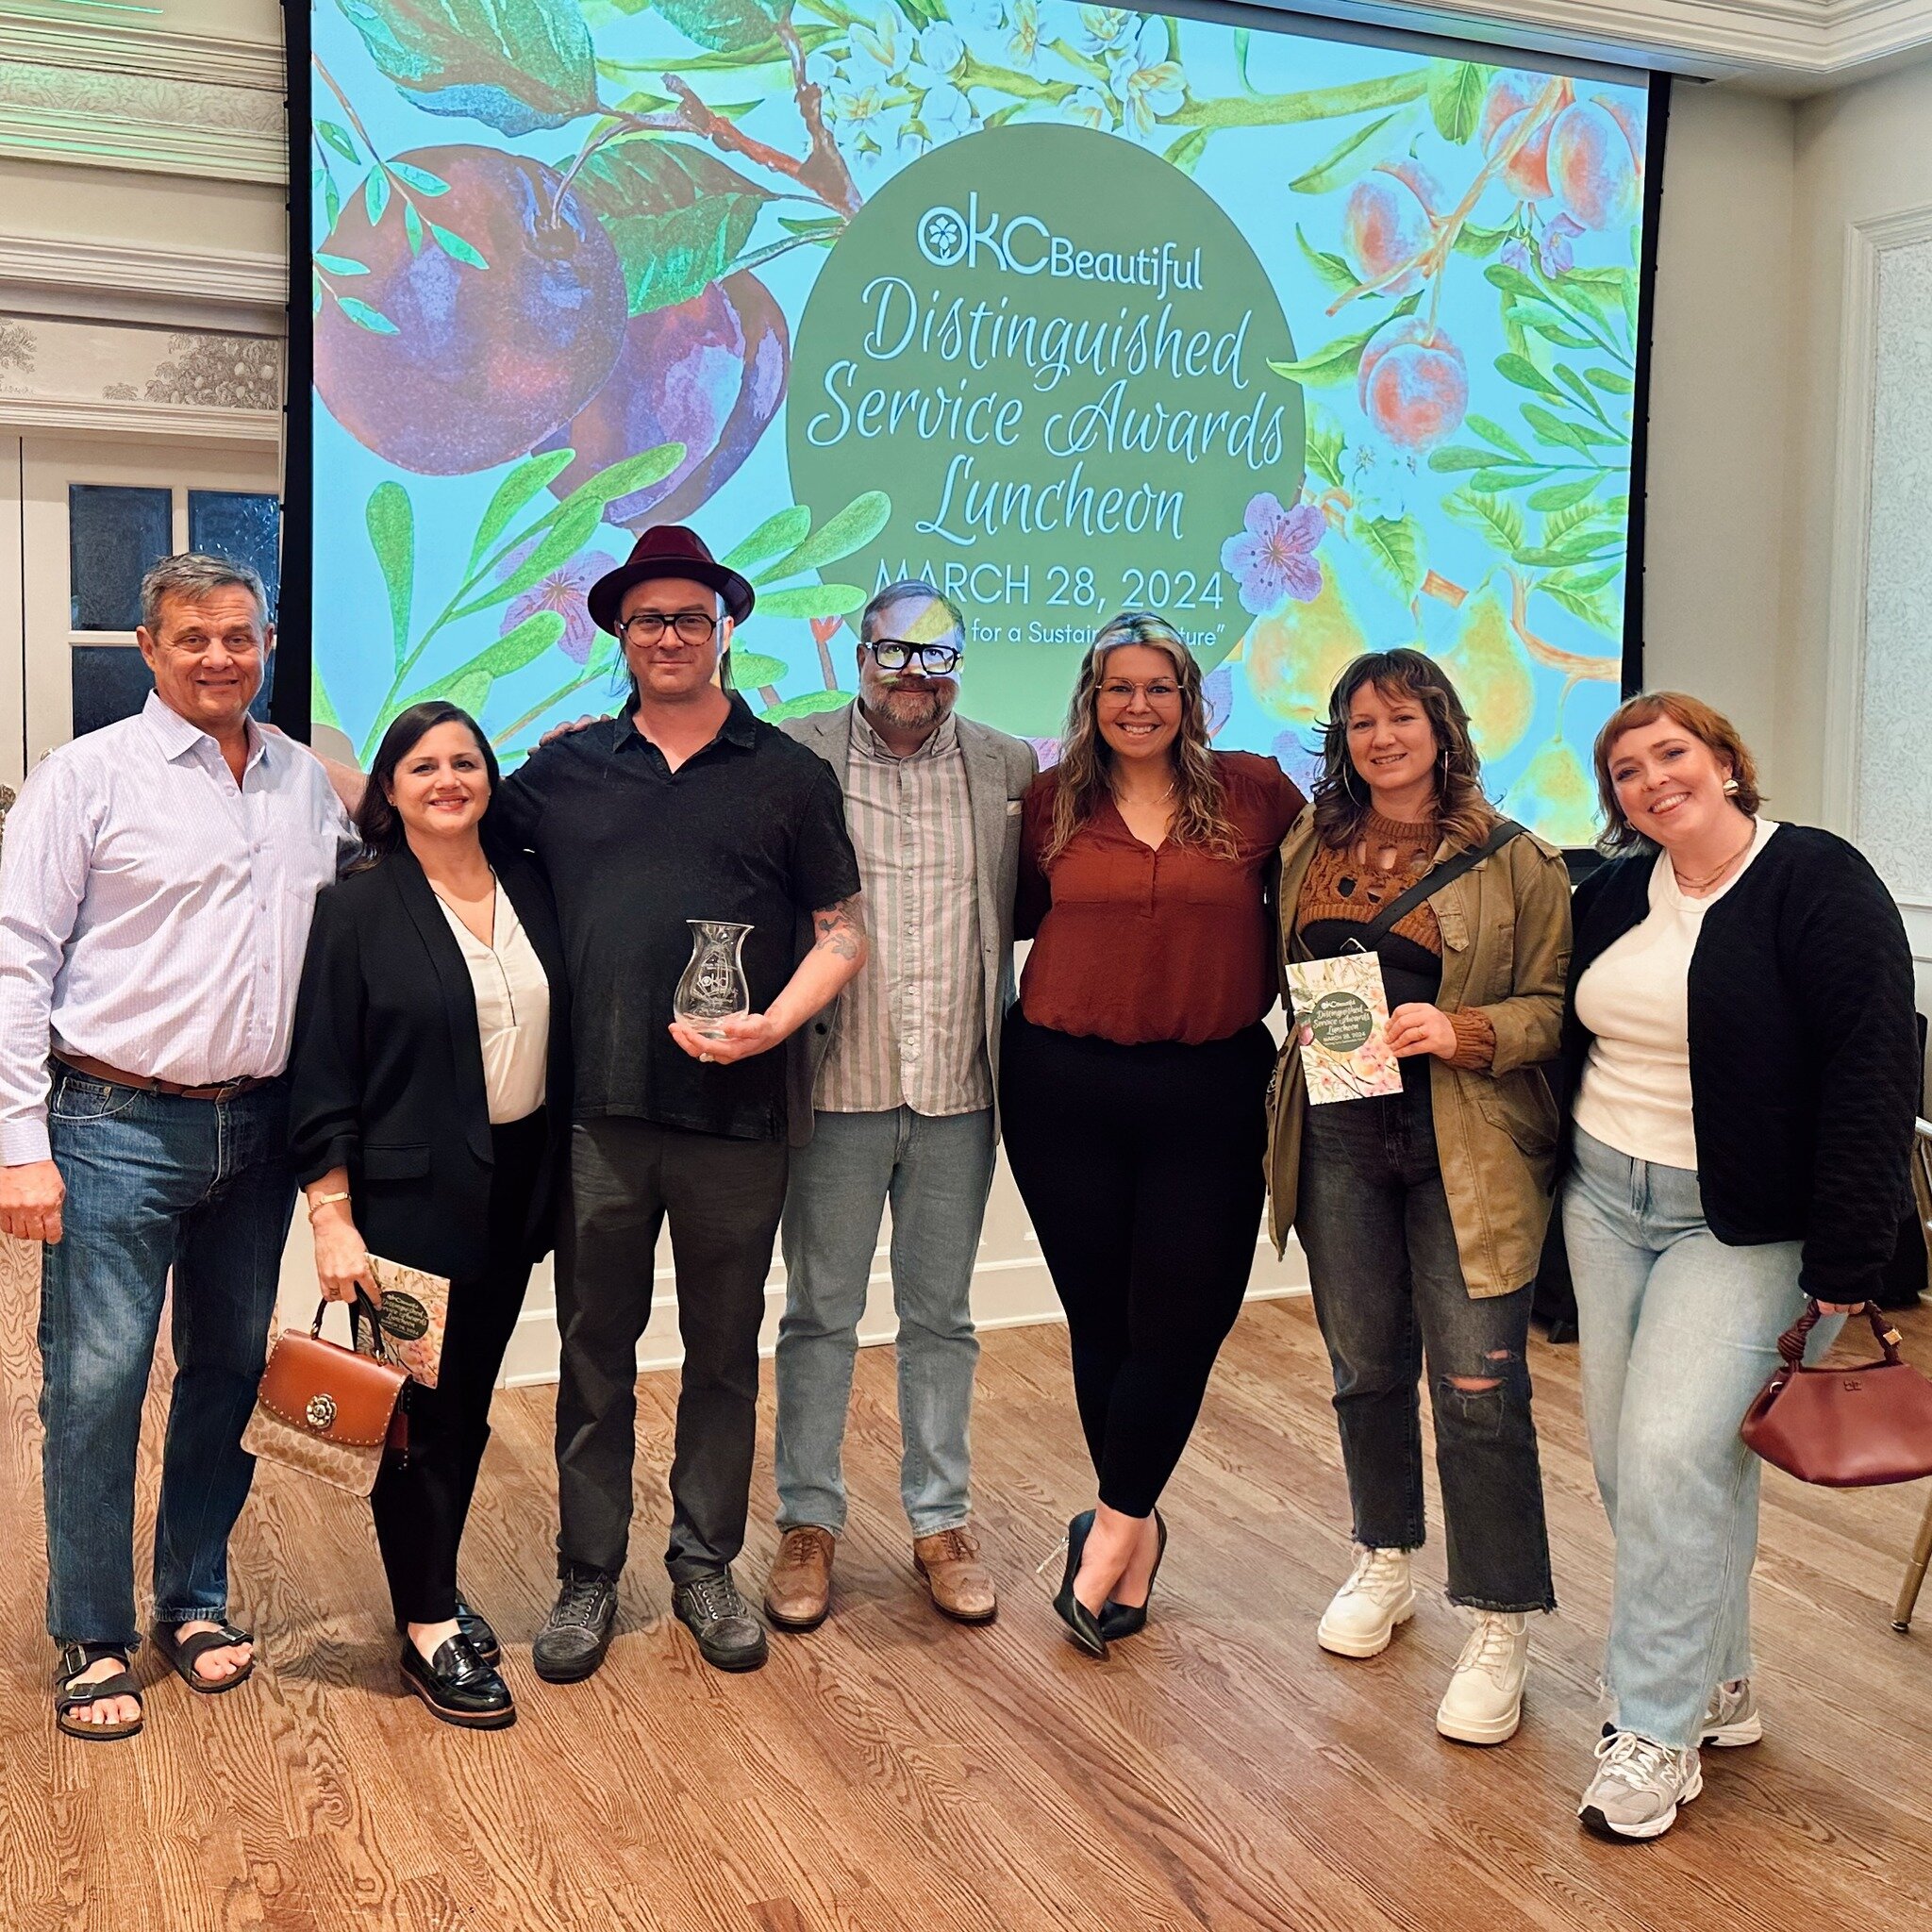 Today we joined @okcbeautiful for their 39th Annual Distinguished Service Awards Luncheon to accept the &ldquo;Community Spirit Award&rdquo; &mdash; we couldn&rsquo;t be more honored to keep the spirit of the community alive through public art and we